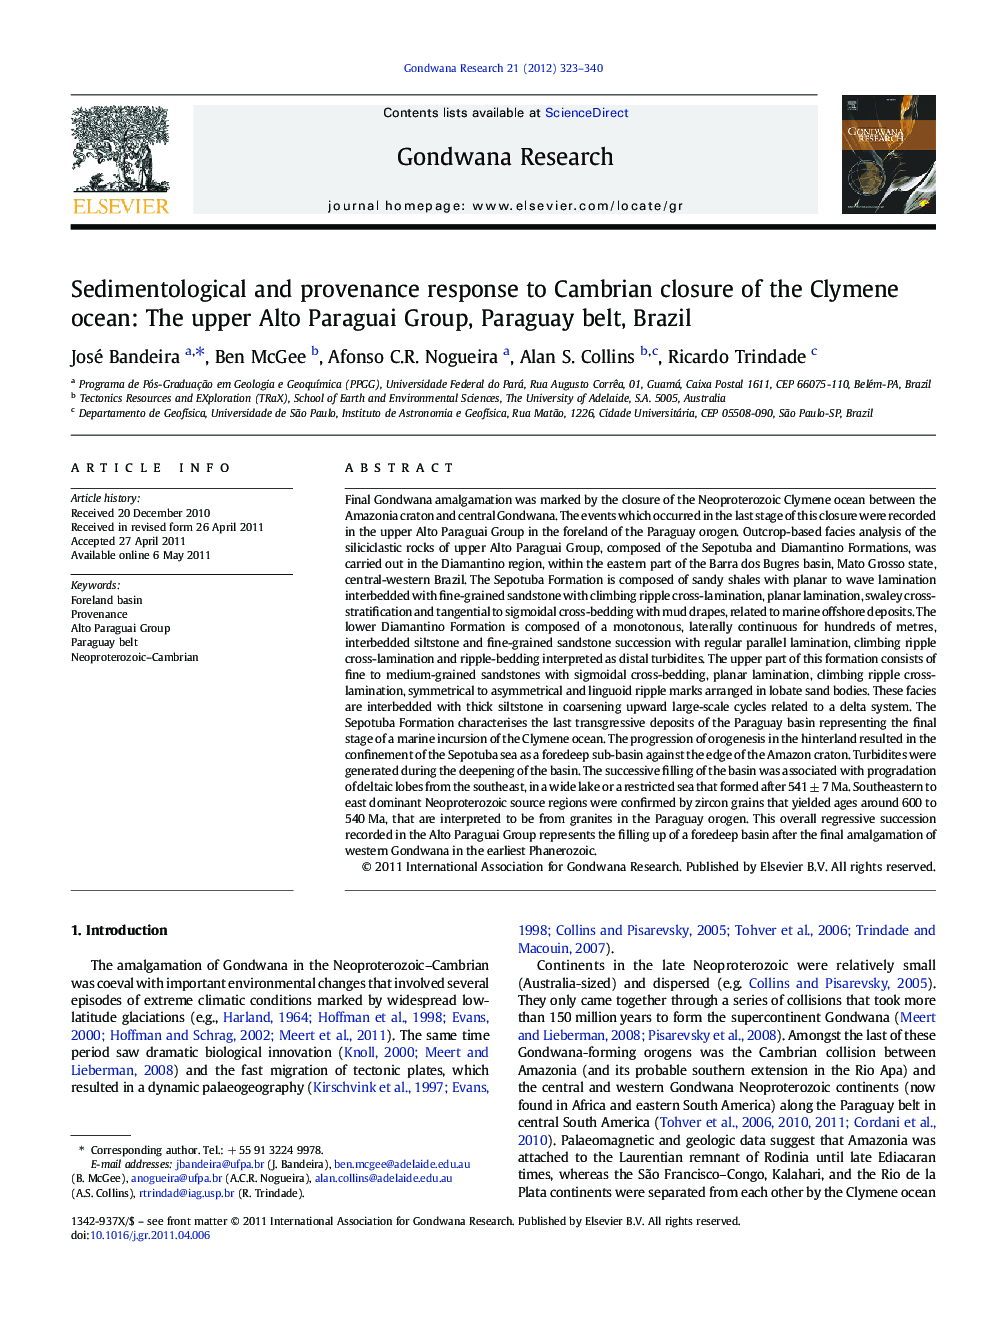 Sedimentological and provenance response to Cambrian closure of the Clymene ocean: The upper Alto Paraguai Group, Paraguay belt, Brazil